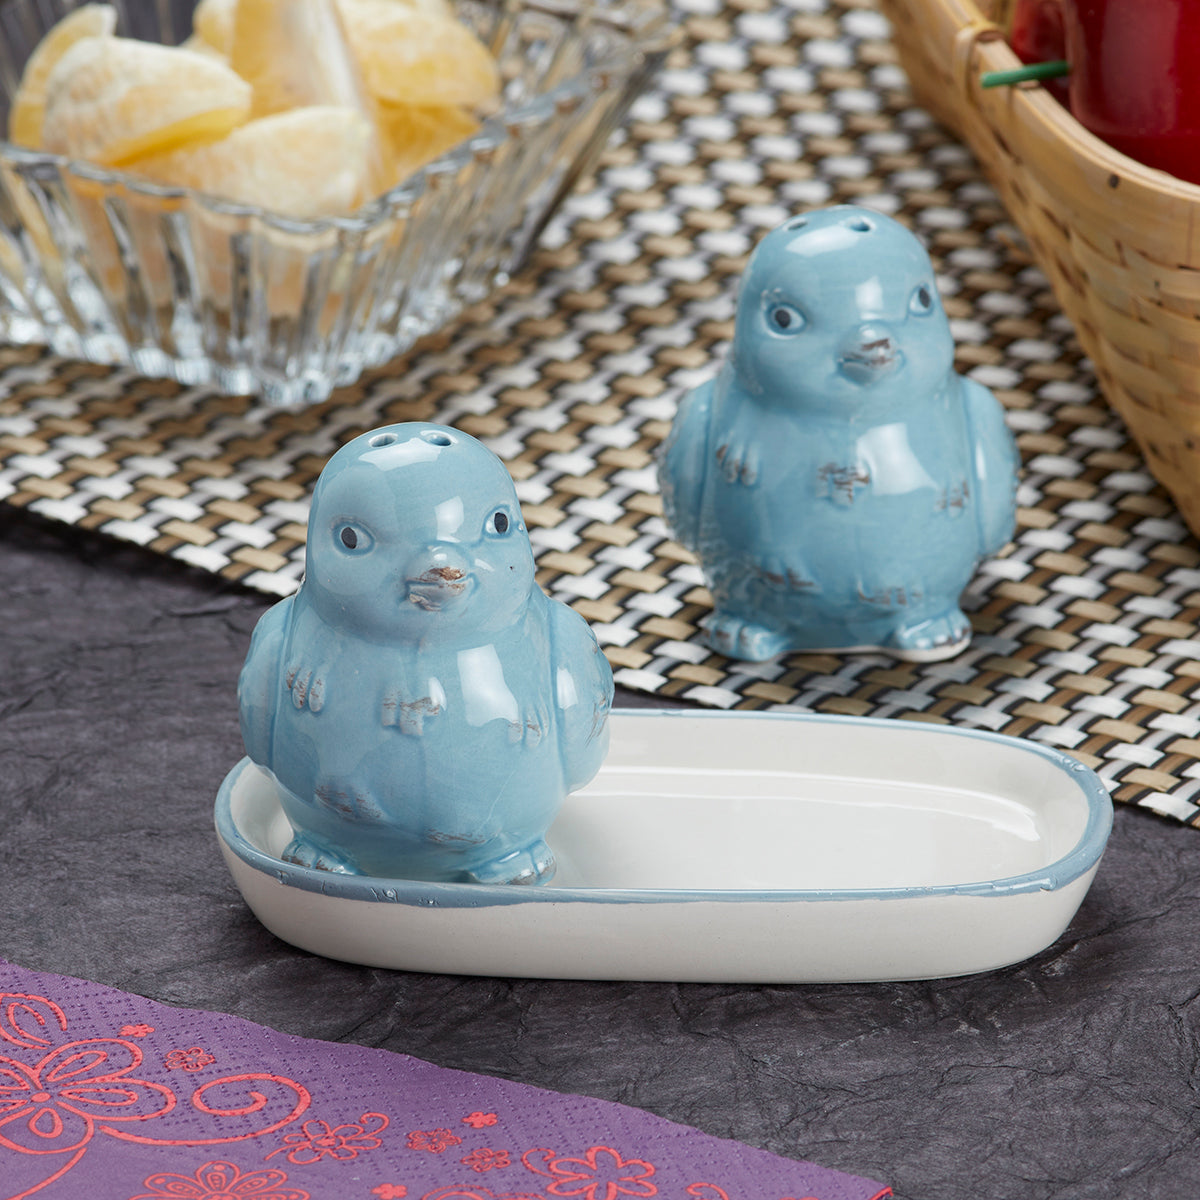 Ceramic Salt Pepper Container Set with tray for Dining Table (9975)